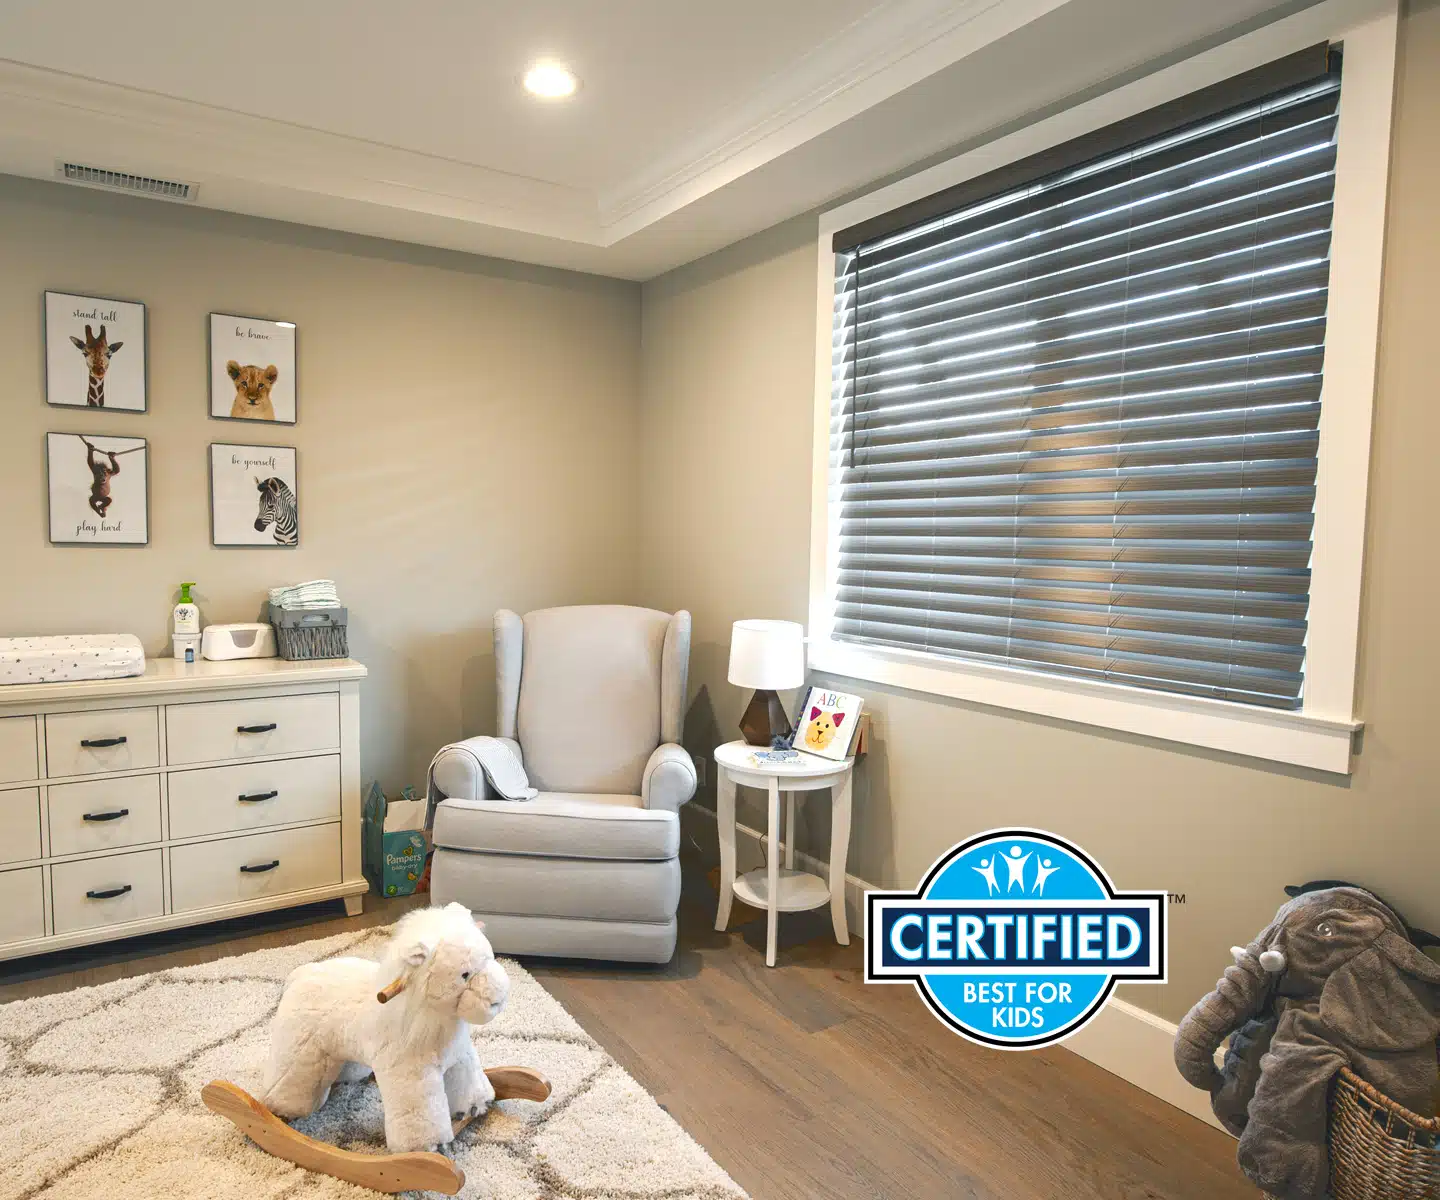 Located in Bethesda, MD, a monochromatic kids room with Cordless blinds